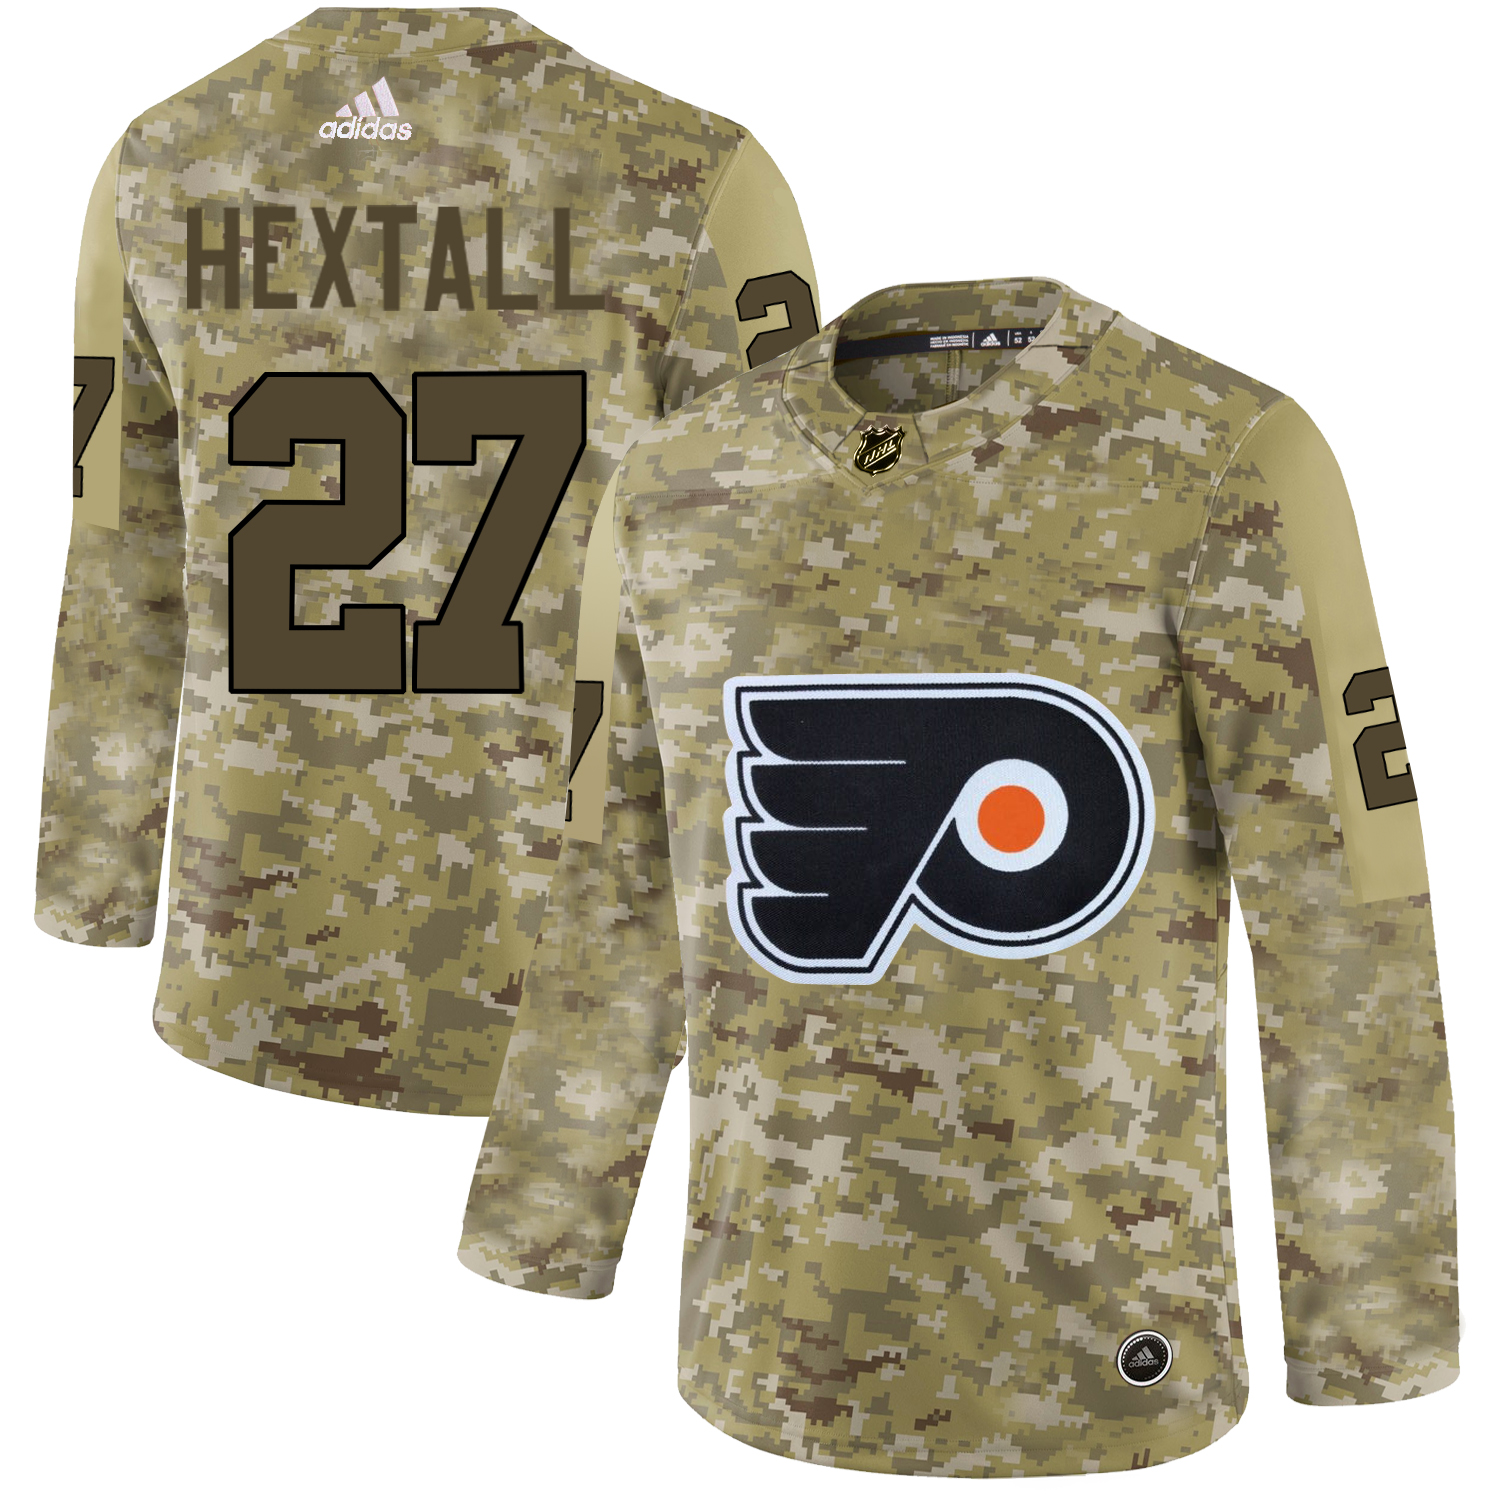 Adidas Flyers #27 Ron Hextall Camo Authentic Stitched NHL Jersey